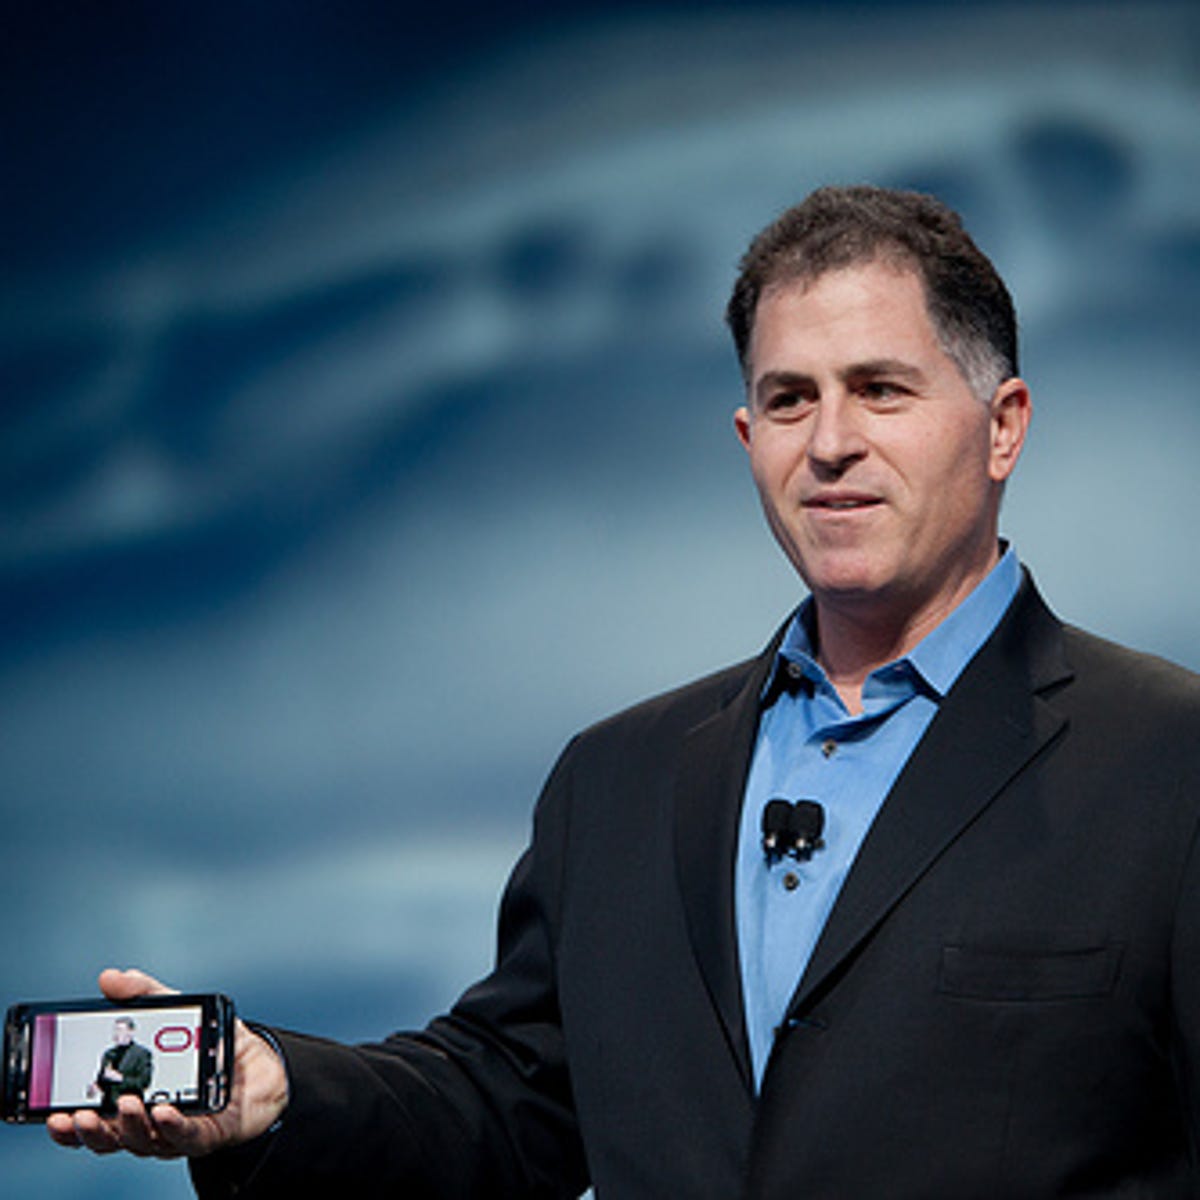 Michael Dell's rationale behind going private | ZDNET